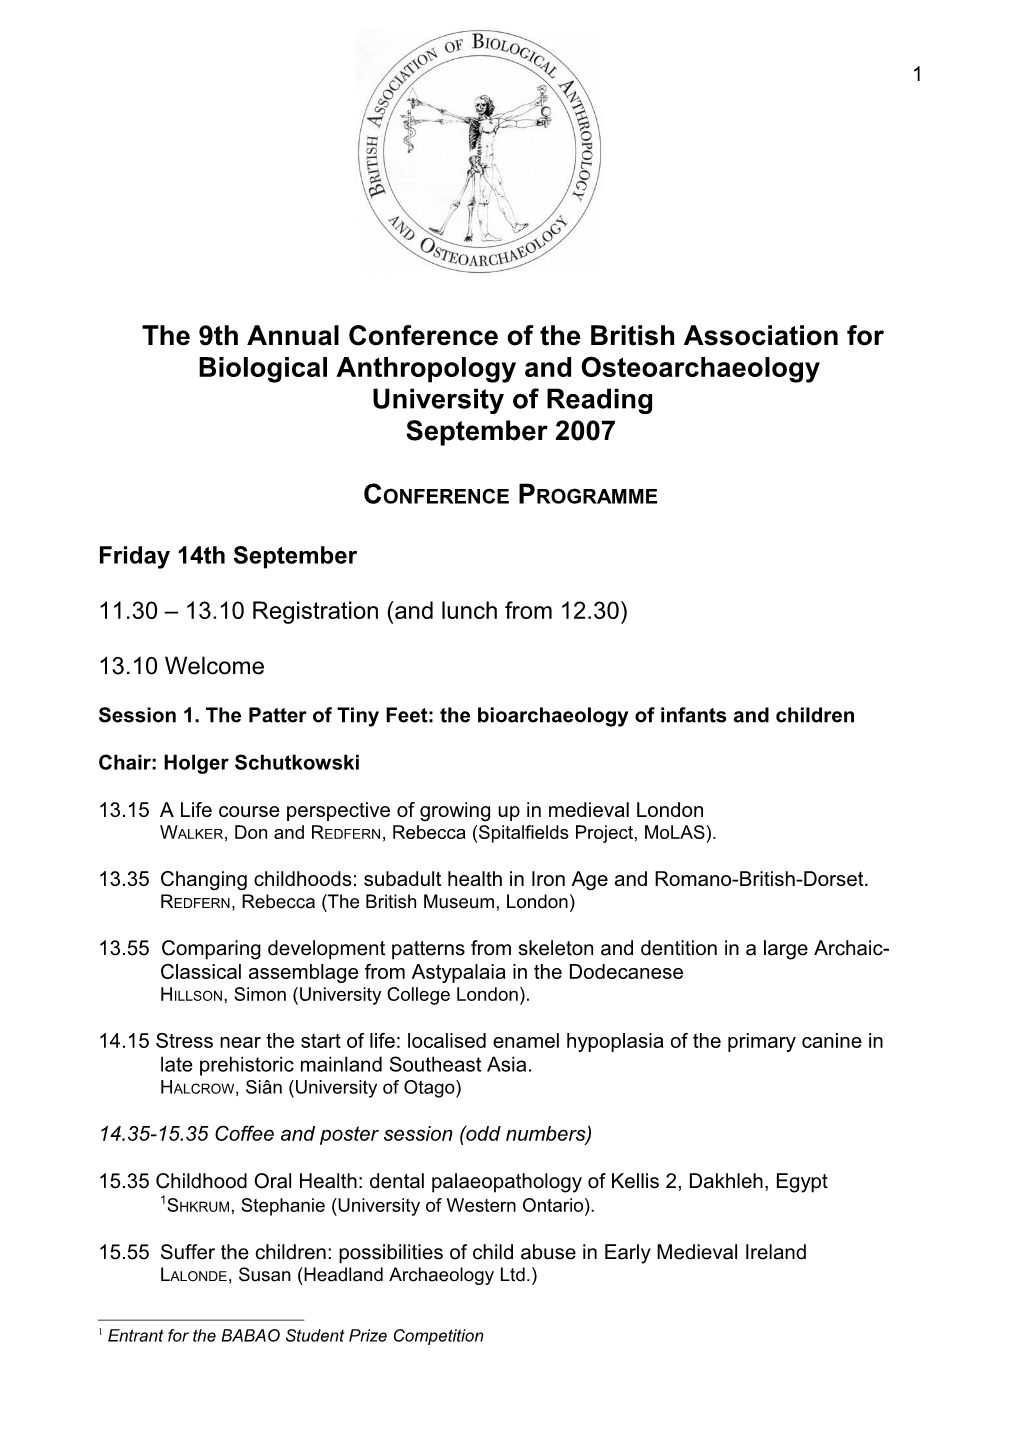 BABAO 9Th ANNUAL CONFERENCE